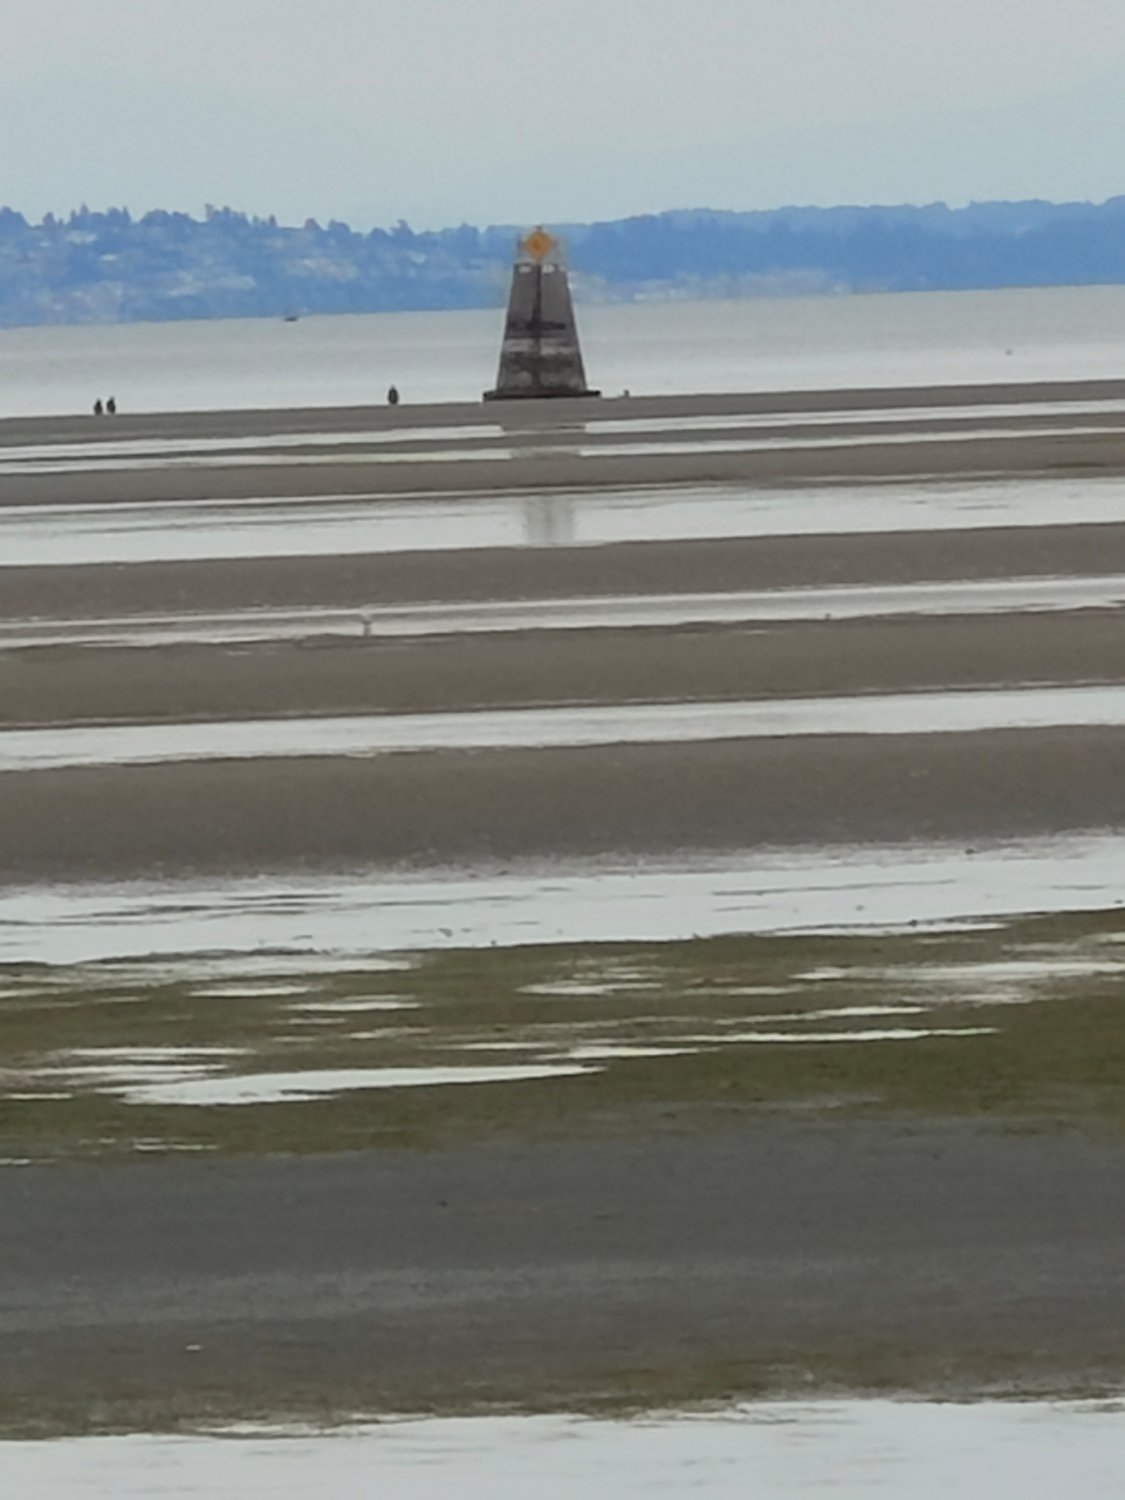 A minus 3.8 tide on Wednesday, June 15 allowed Maple Beach walkers to get up close and personal with the border marker.